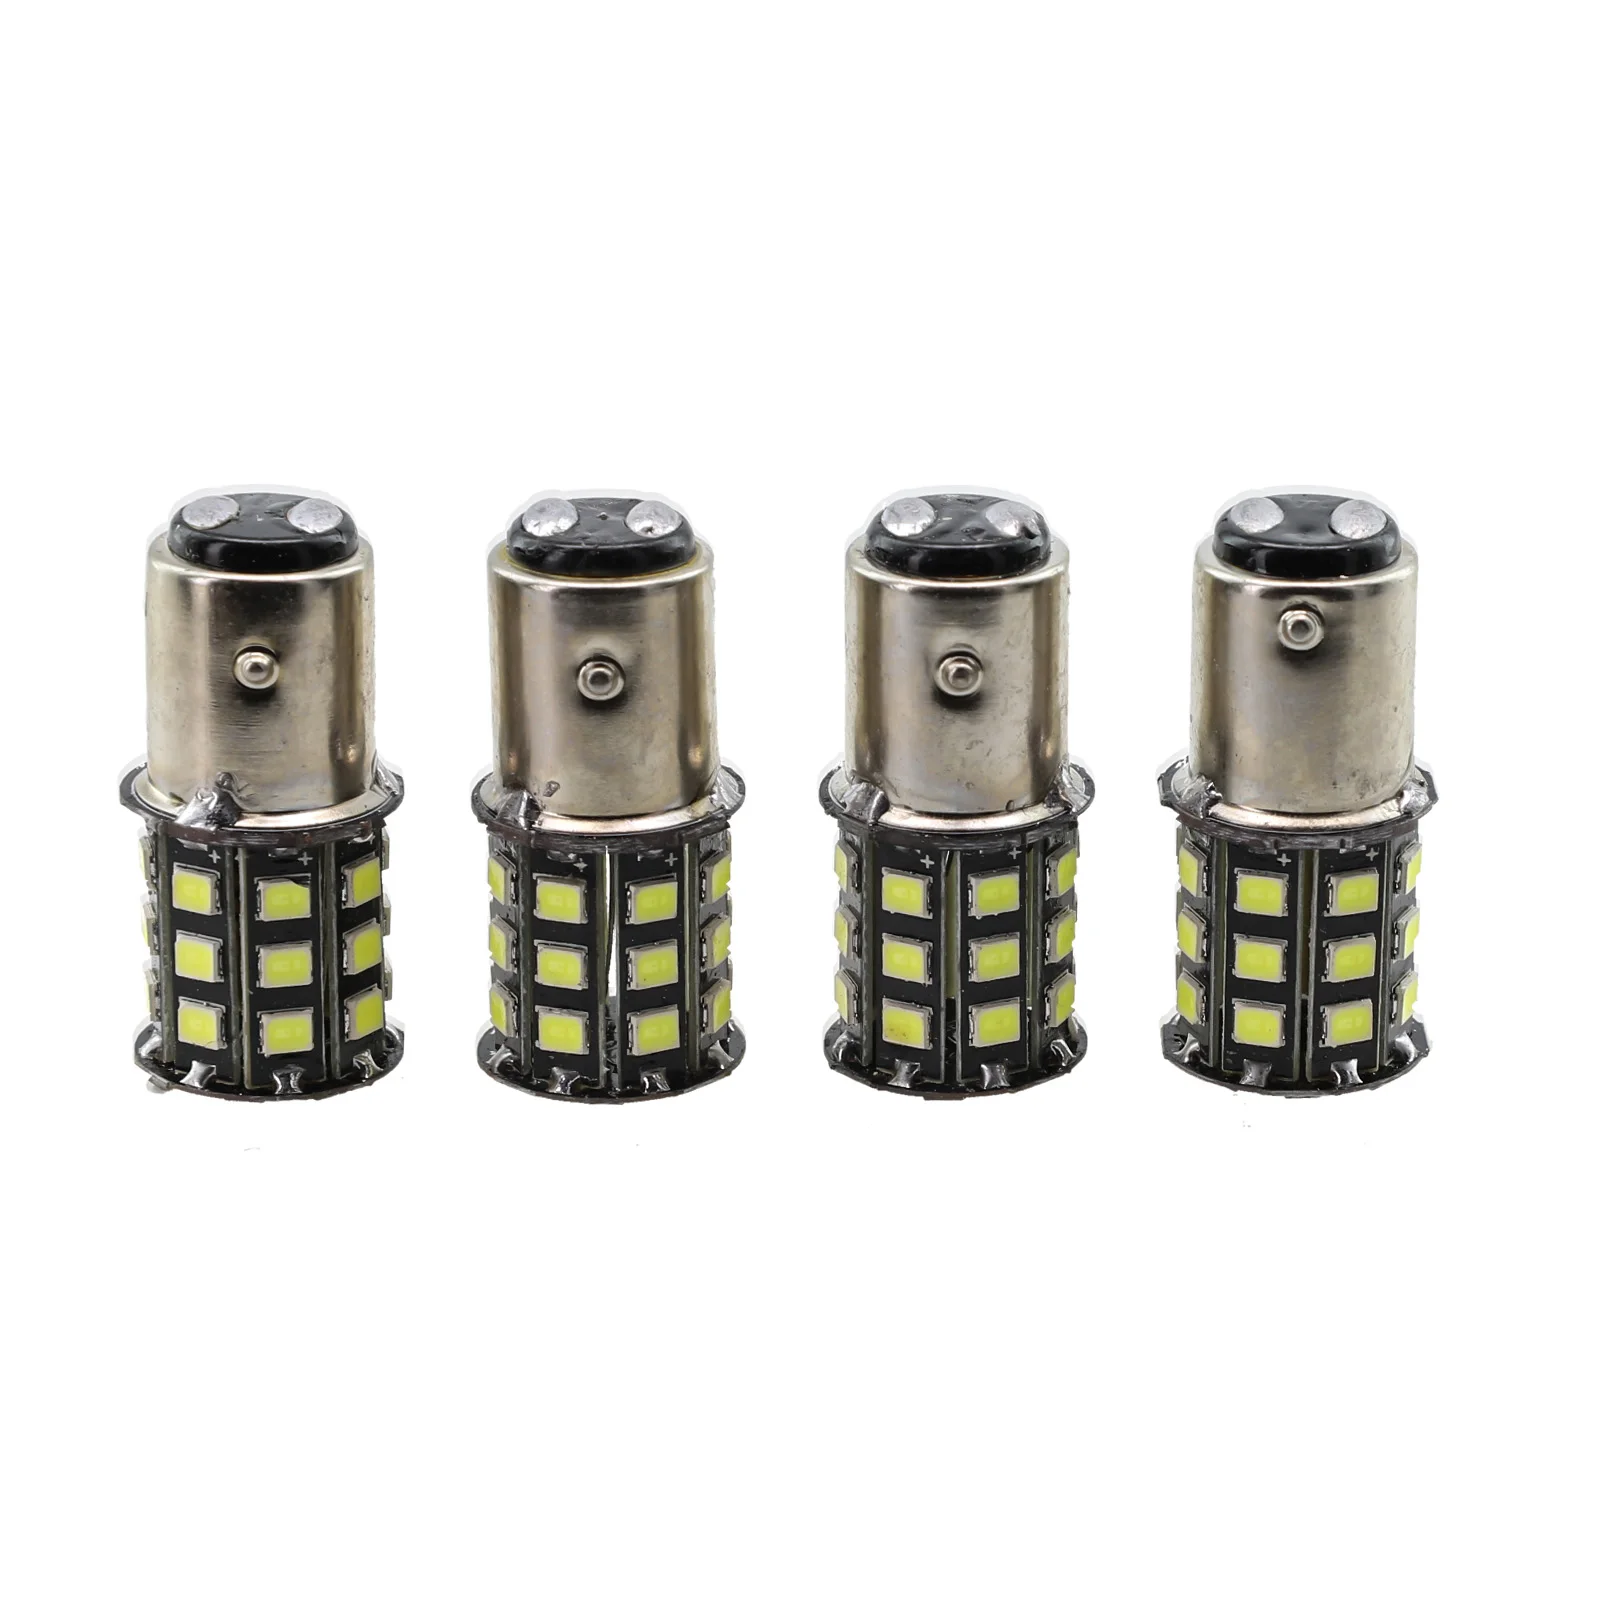 

Get Superior Visibility with 4Pcs Super White 1157 LED Tail Brake Stop Reverse Parking Turn Signal Light Bulbs